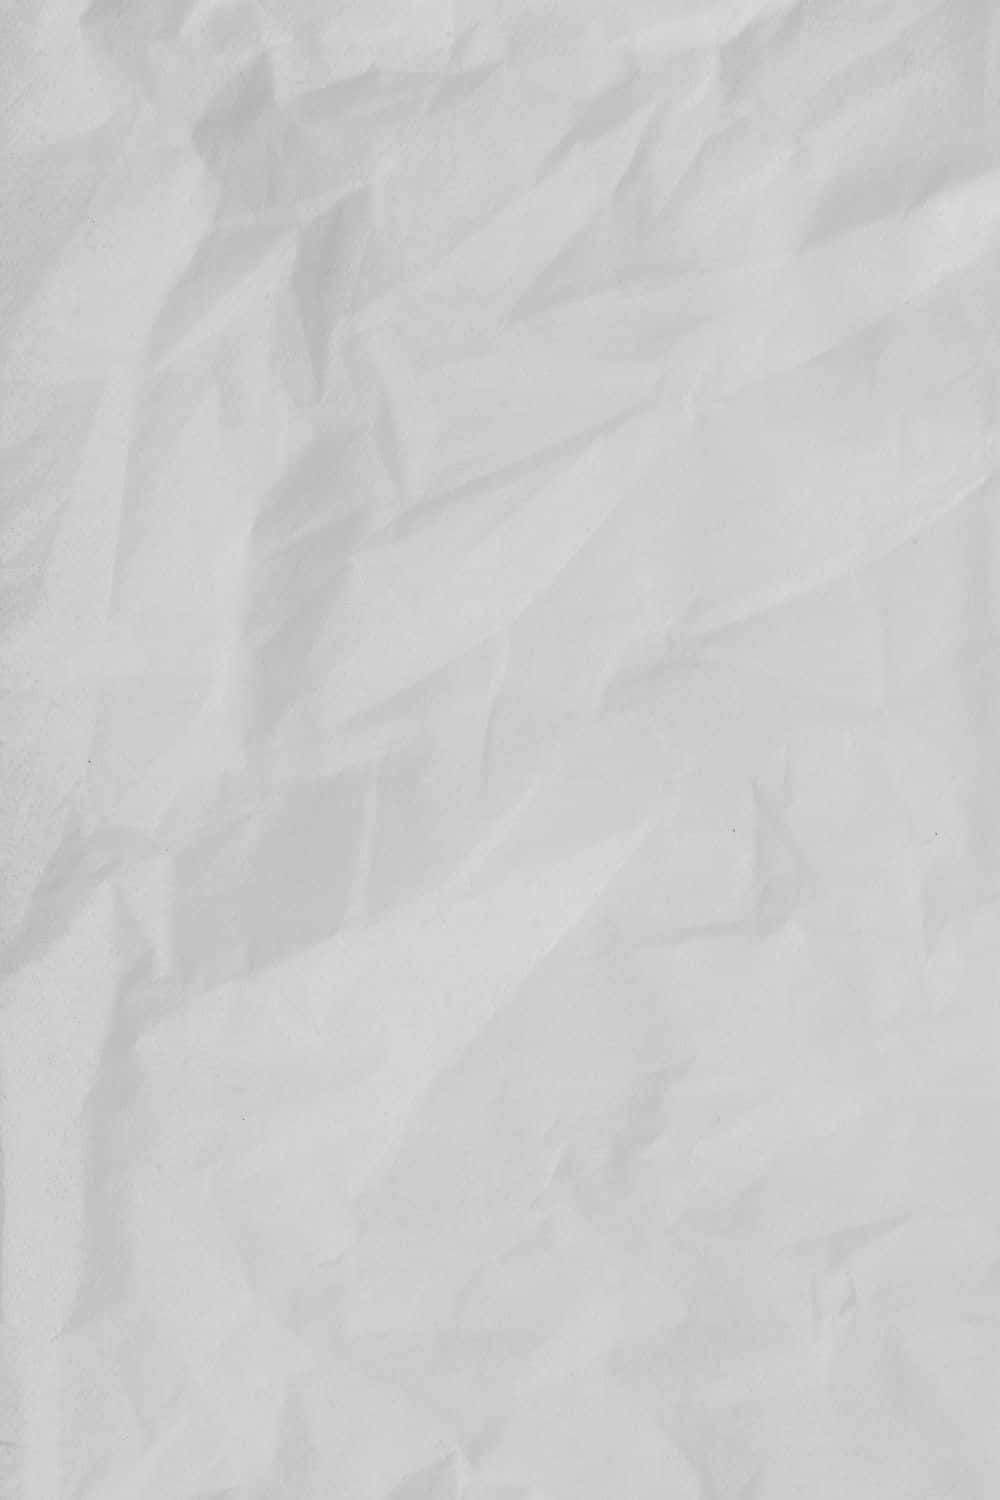 A White Paper Background With A White Background